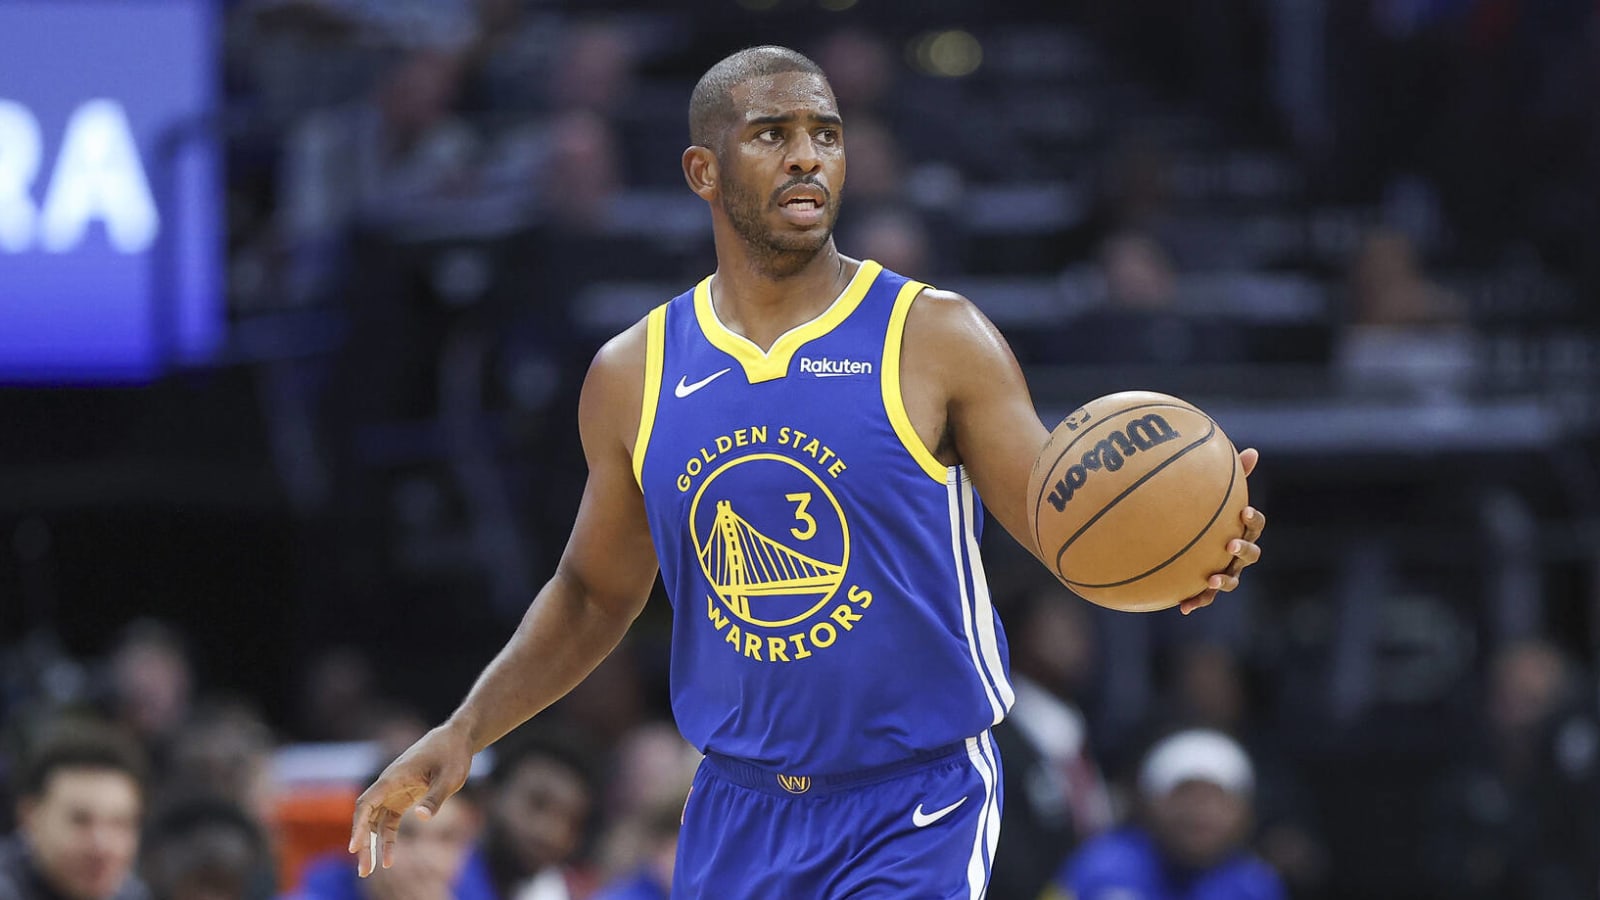 Chris Paul reflects on not starting for the first time in his career